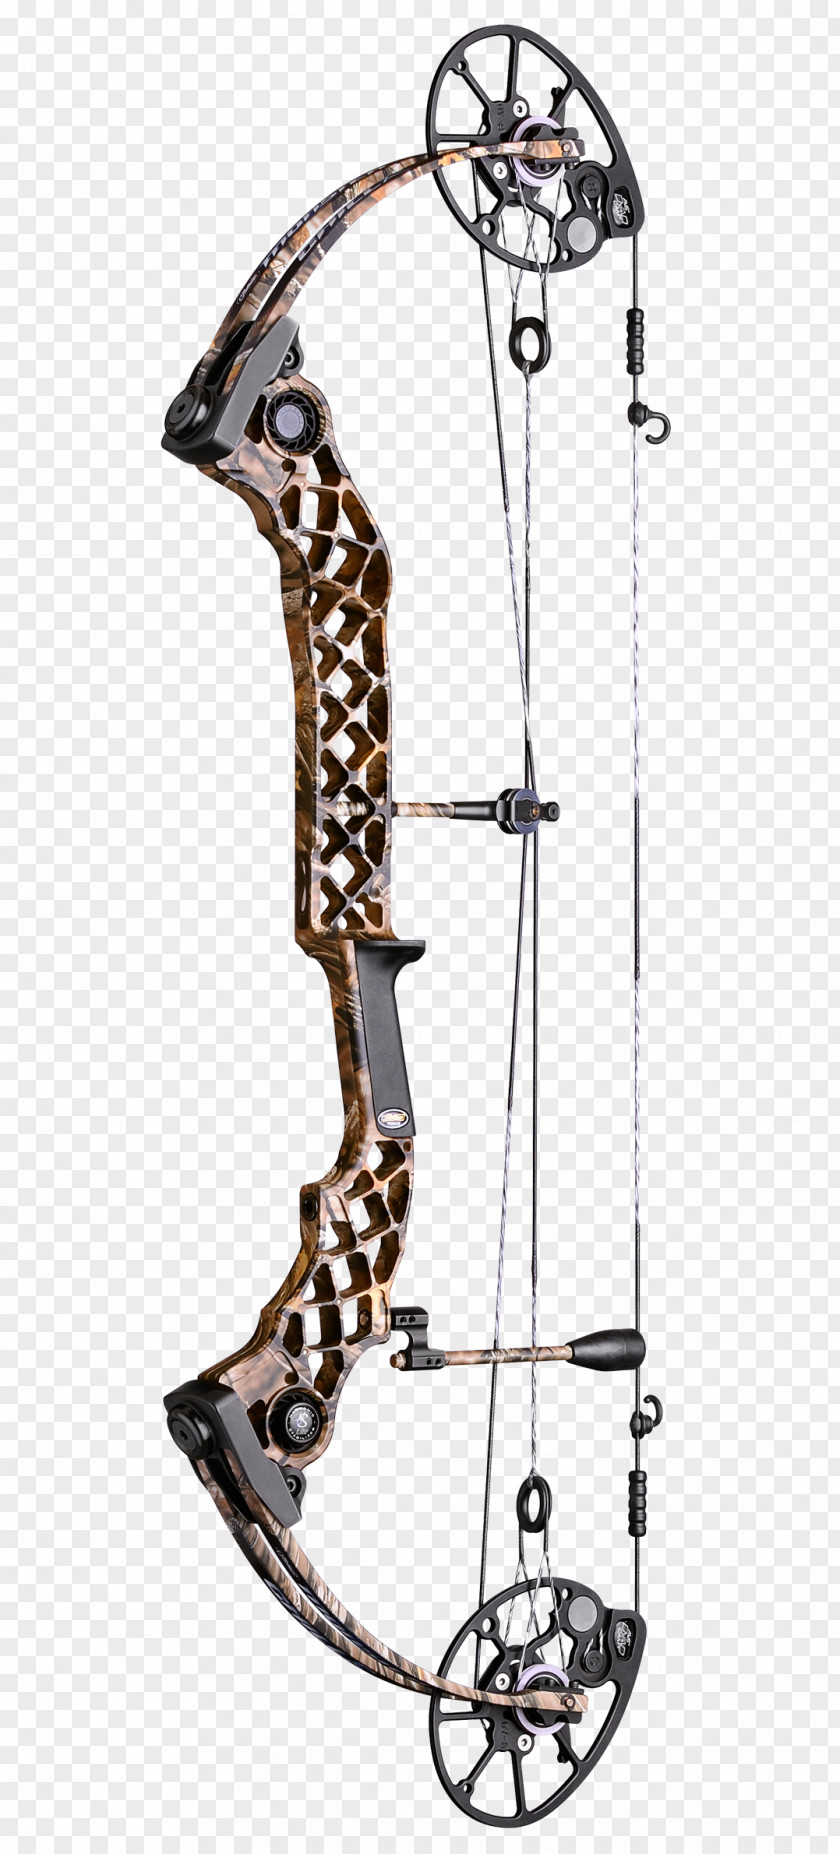 Compound Bows Bow And Arrow Bear Archery PSE PNG